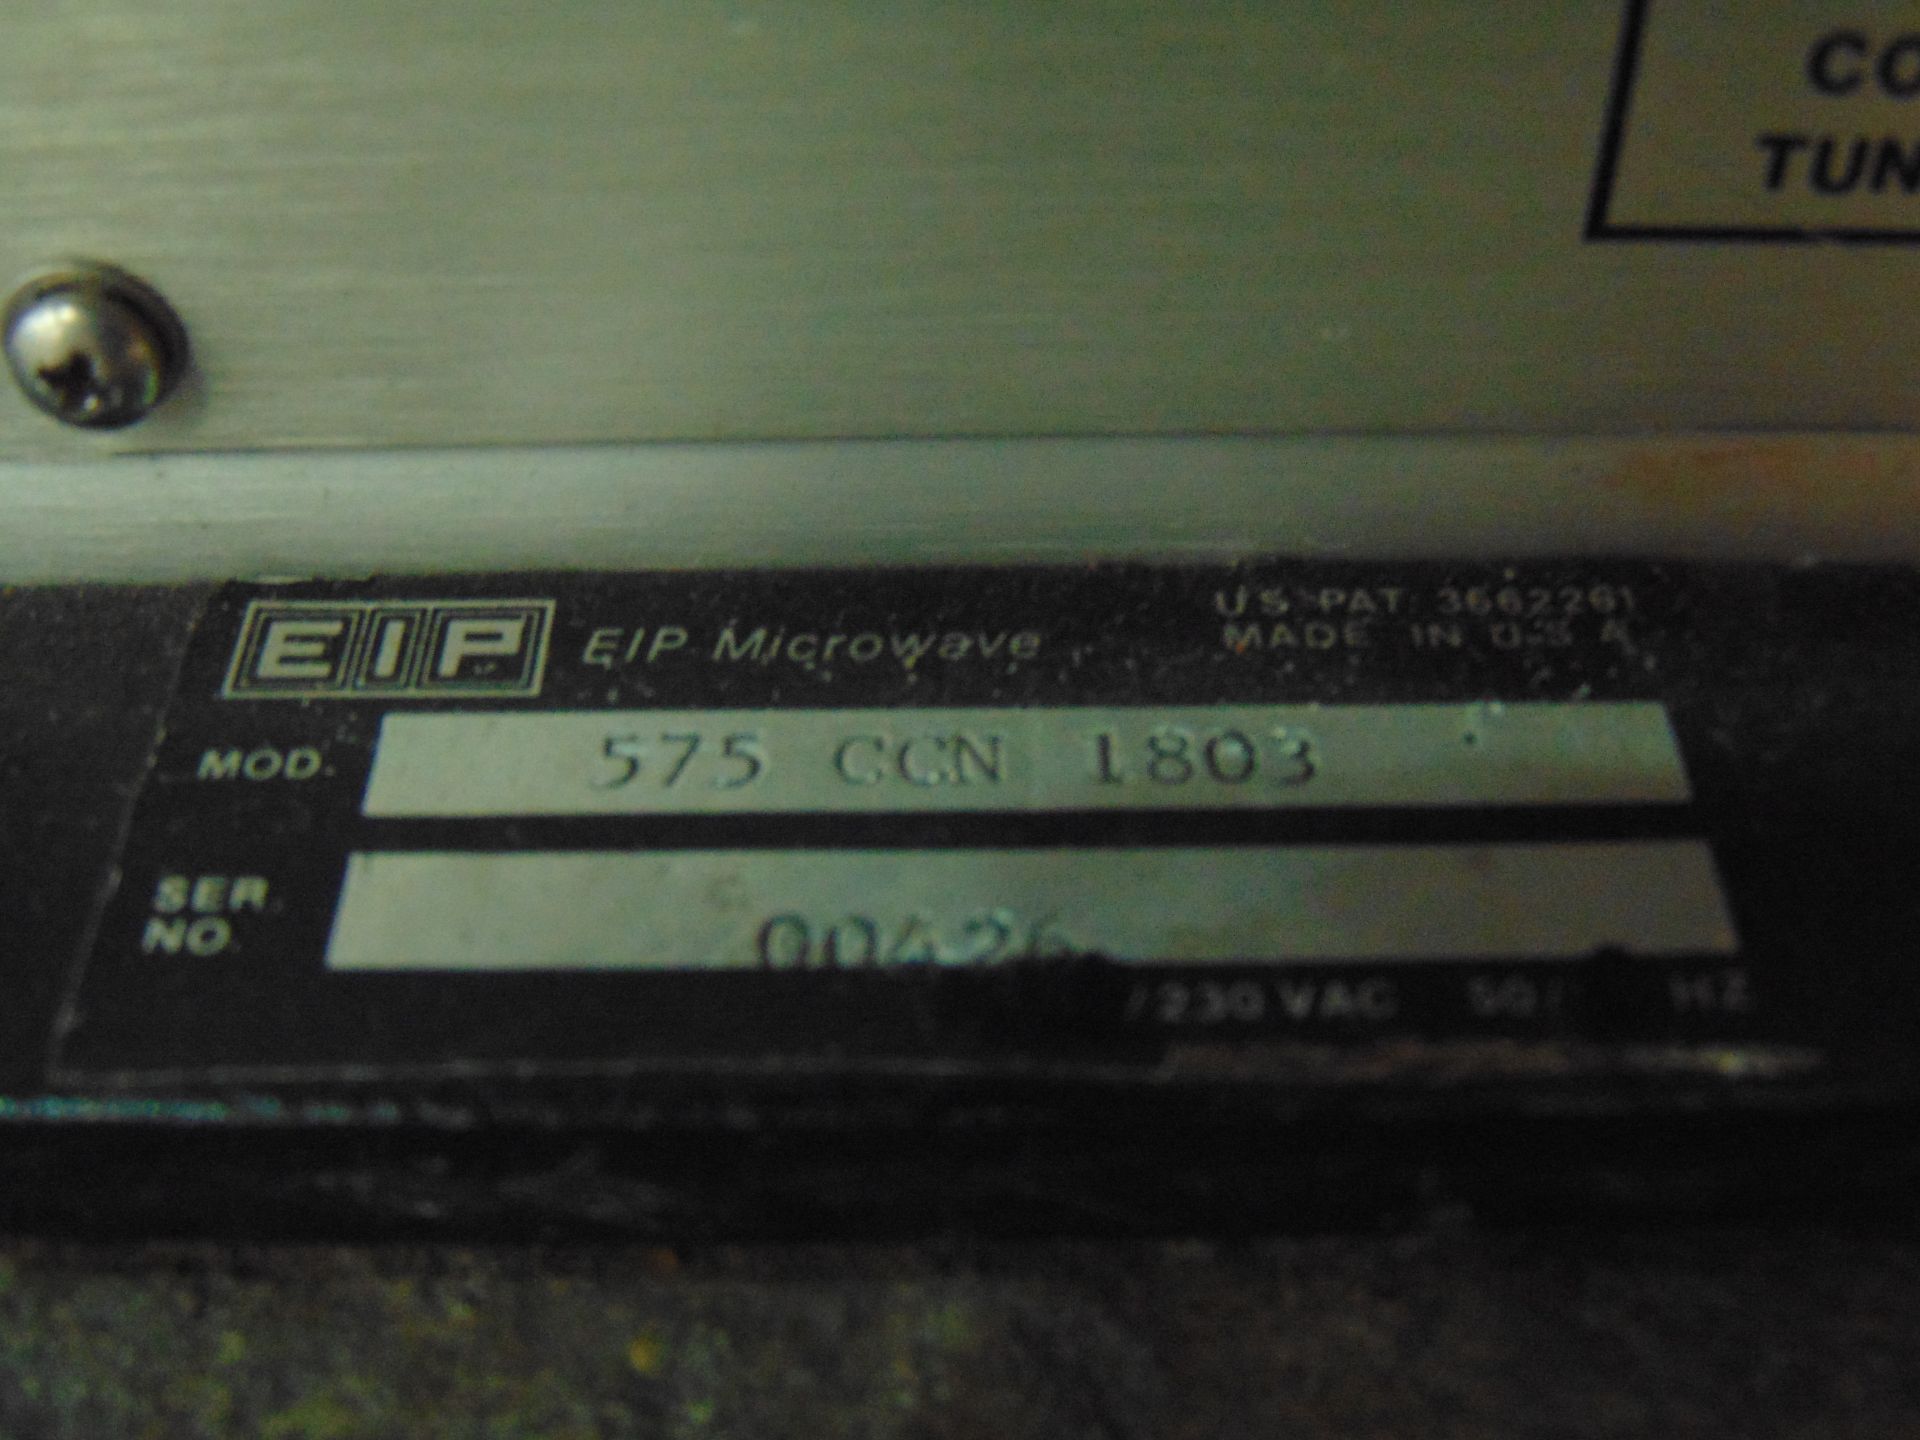 EIP Model 575 Source Locking Microwave Counter - Image 10 of 11